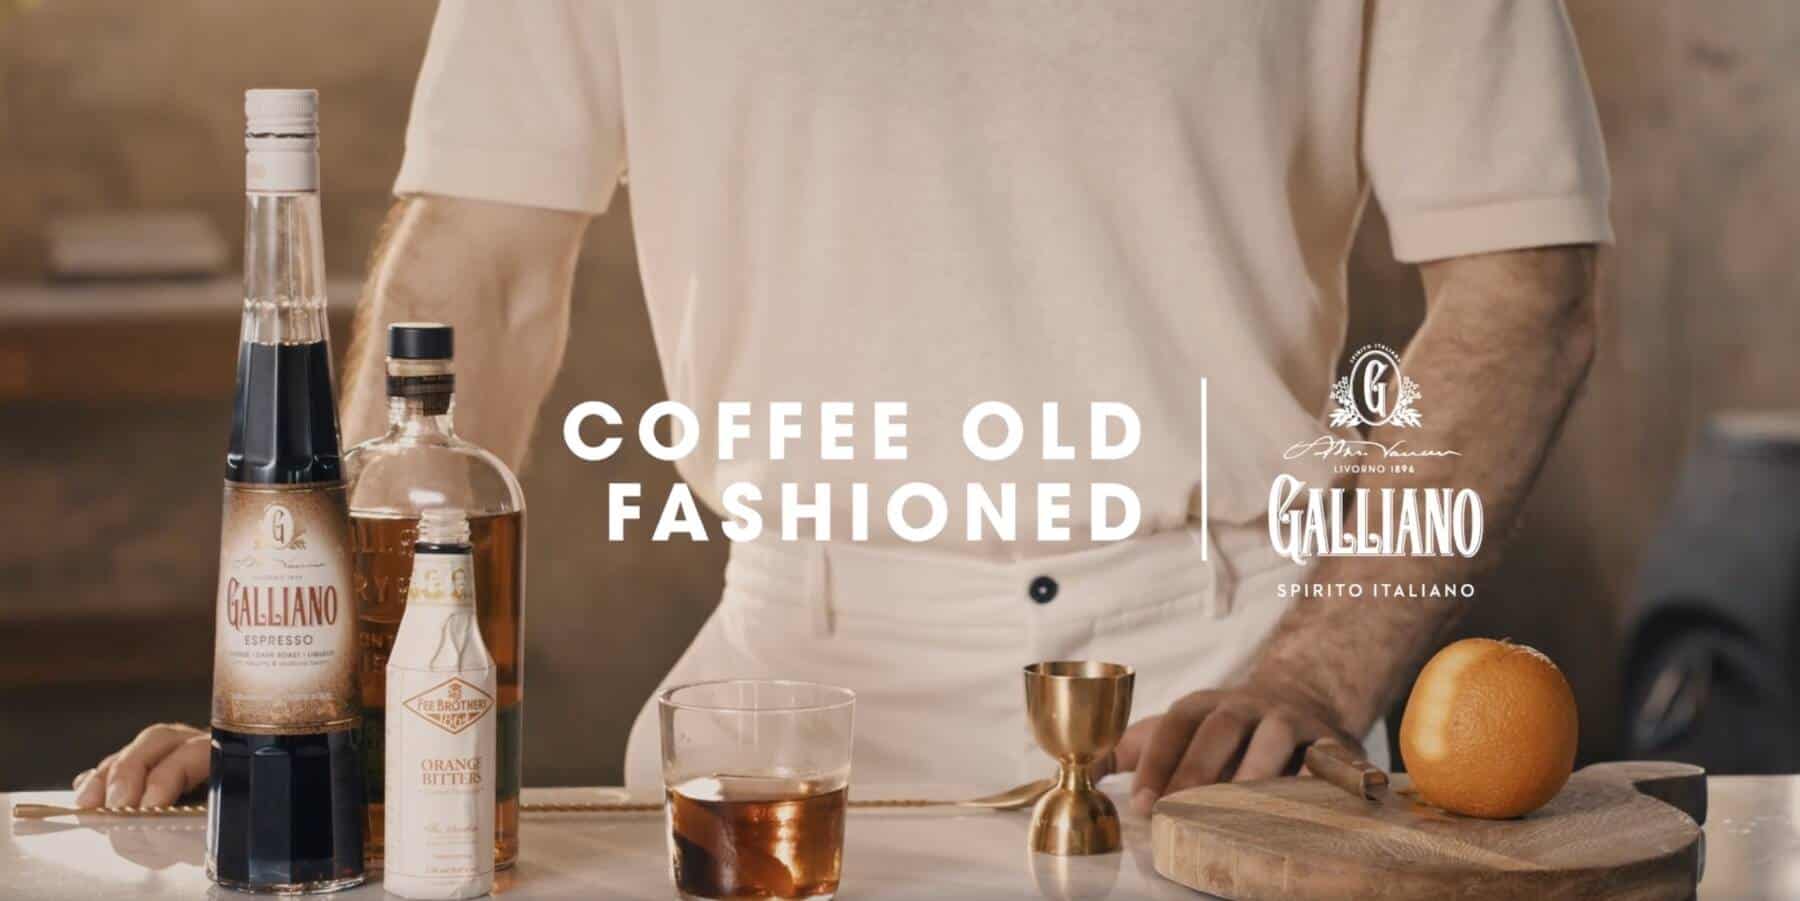 Coffee Old Fashioned cocktail by Galliano